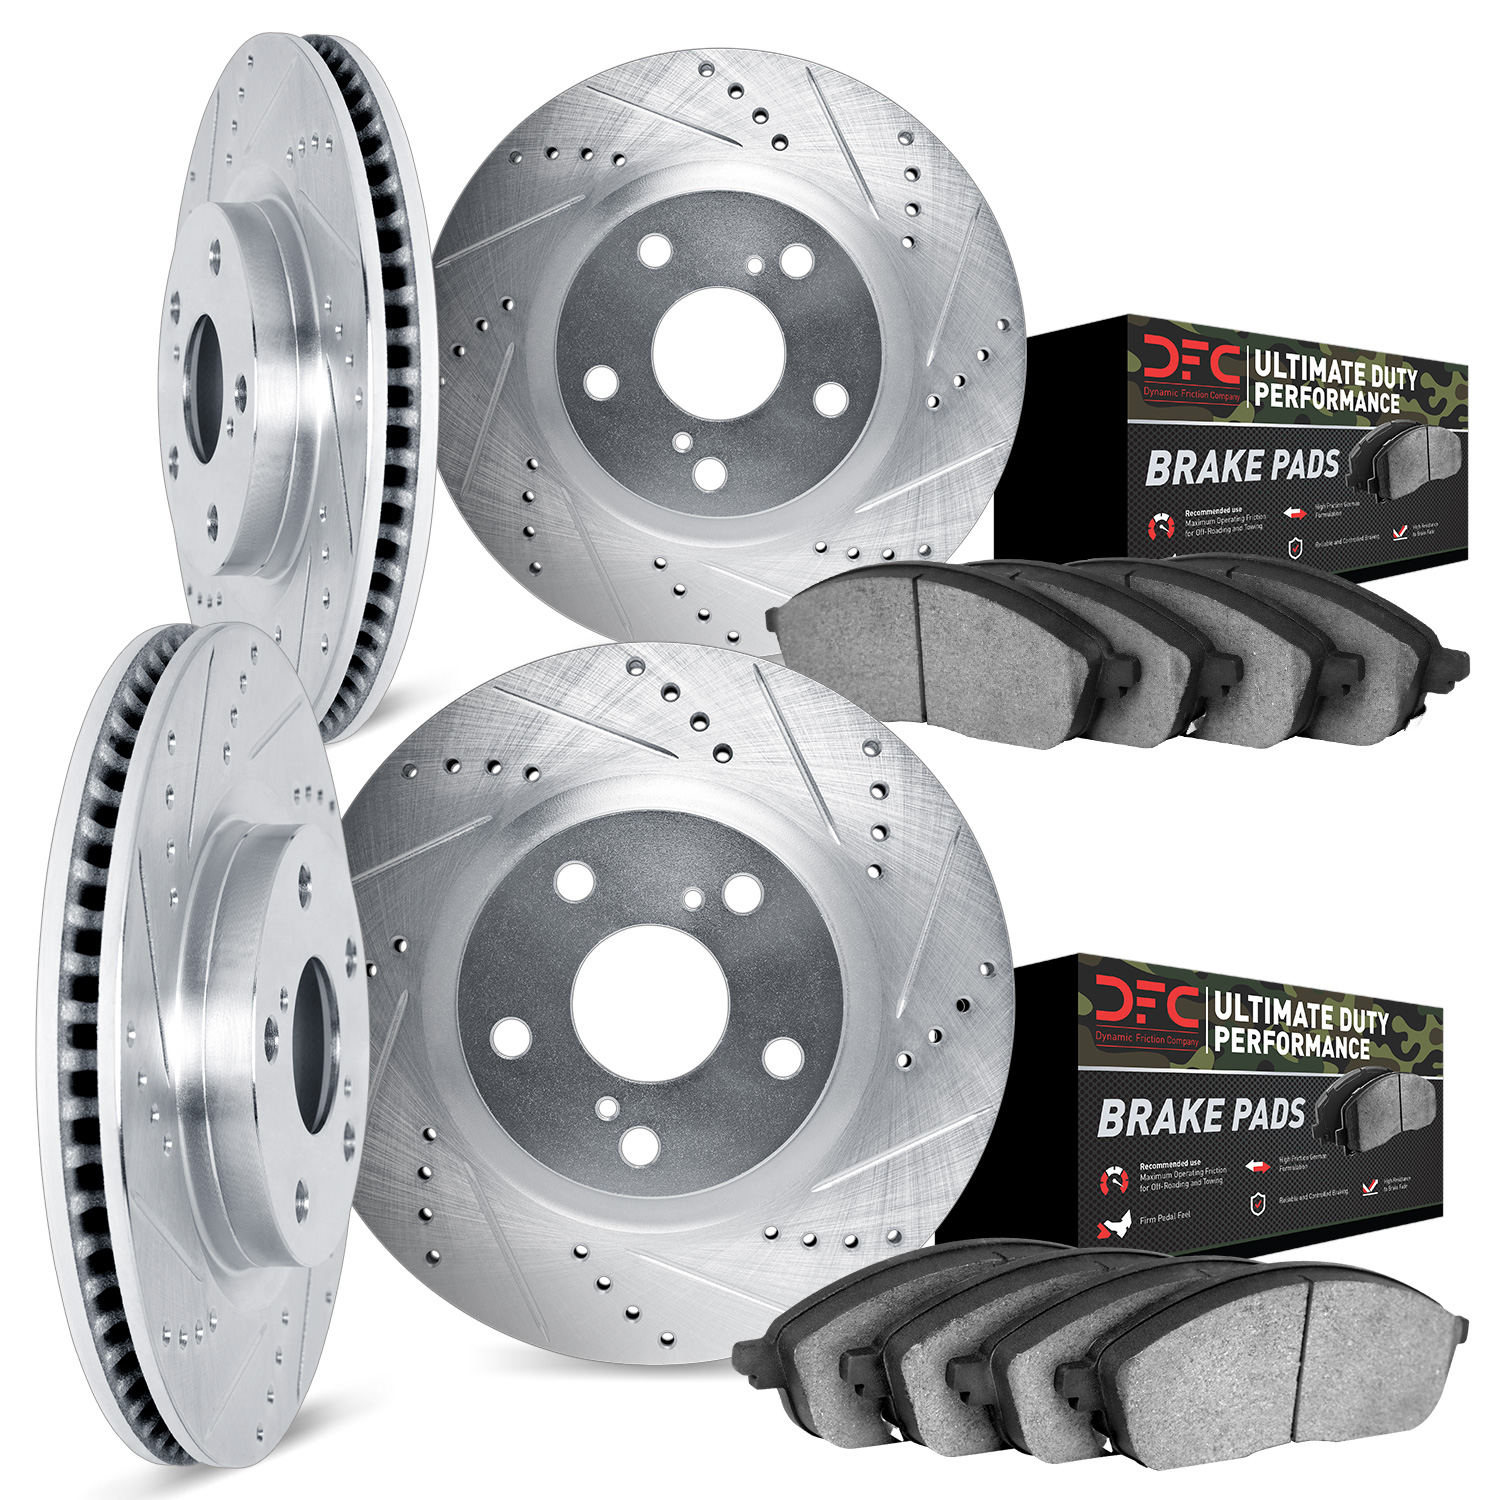 7404-46003 Drilled/Slotted Brake Rotors with Ultimate-Duty Brake Pads Kit [Silver], 2009-2015 GM, Position: Front and Rear